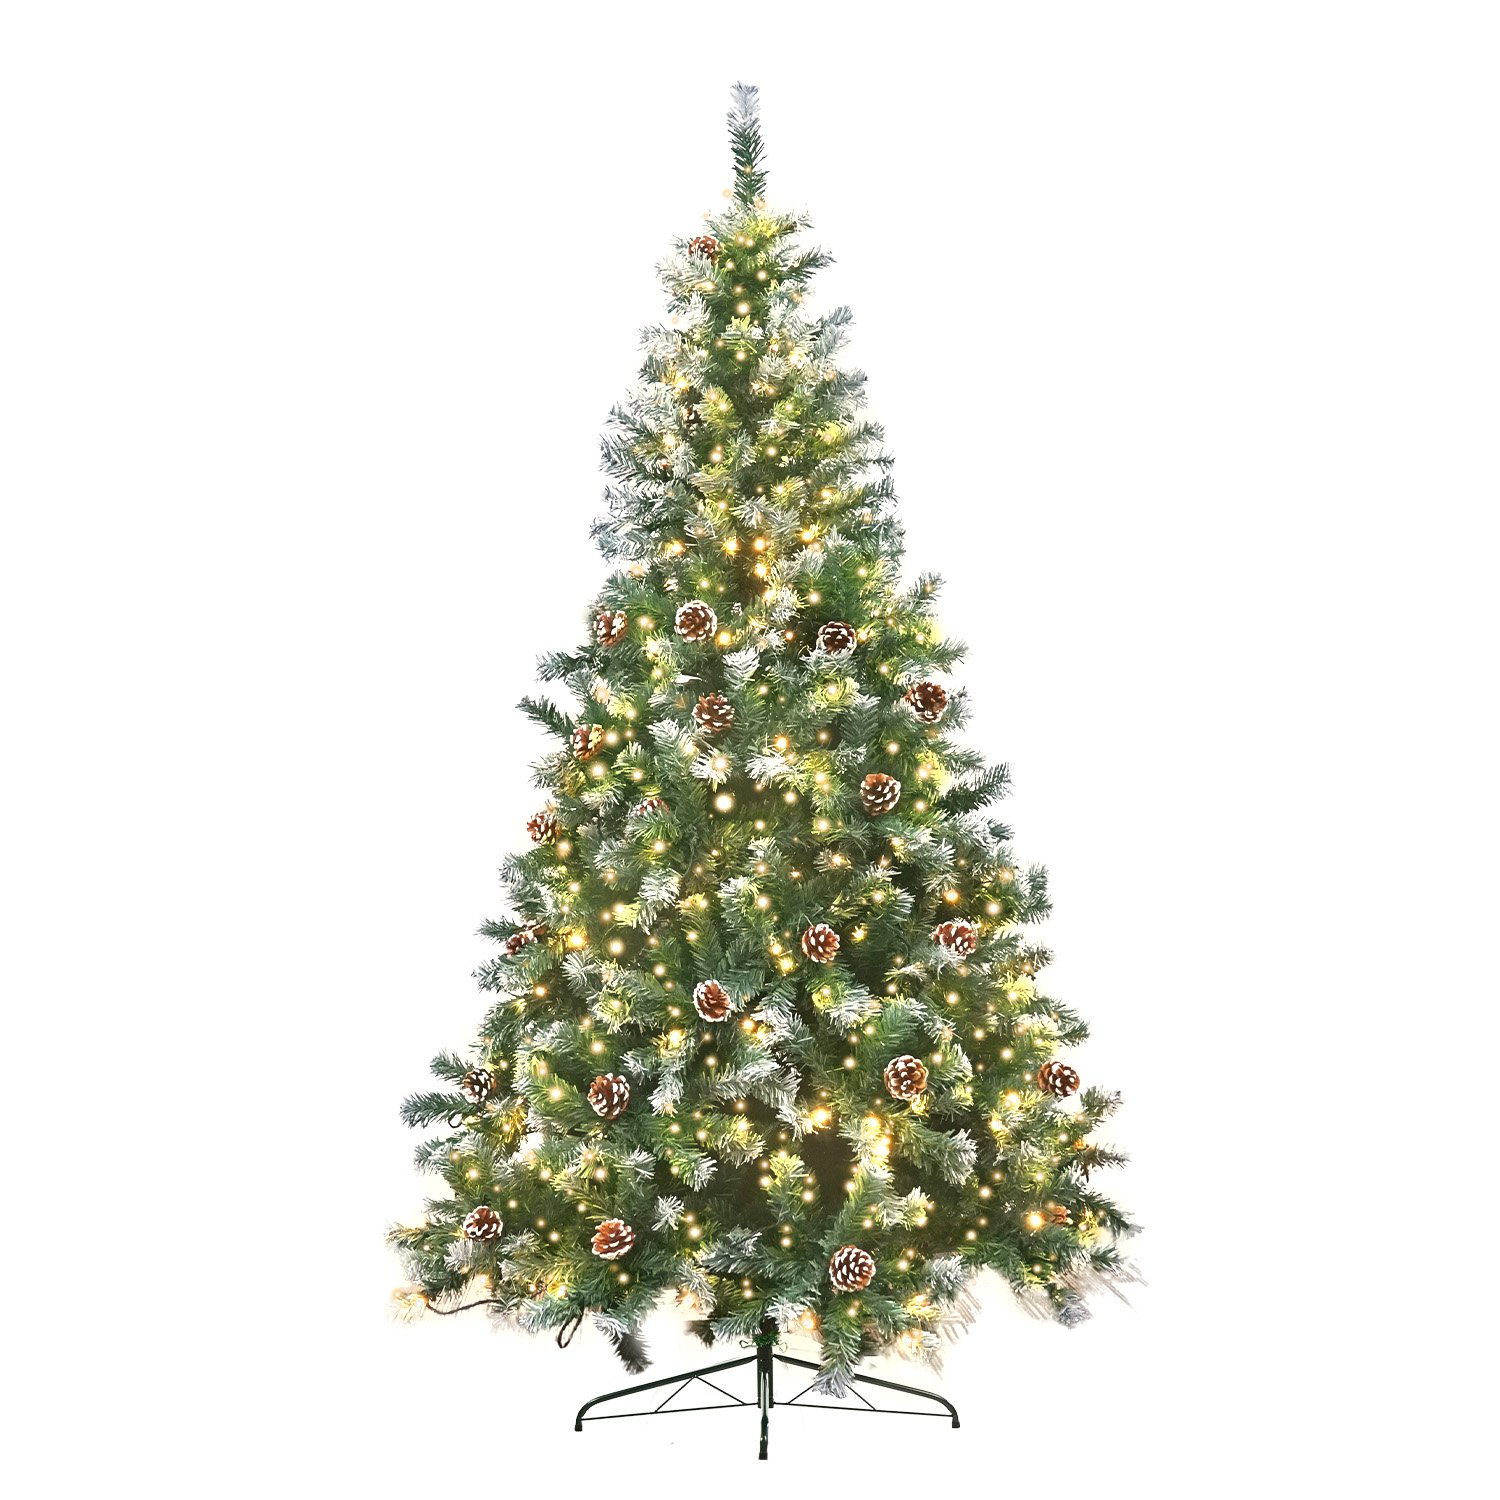 Christabelle 2m Pre Lit LED Christmas Tree with Pine Cones 2